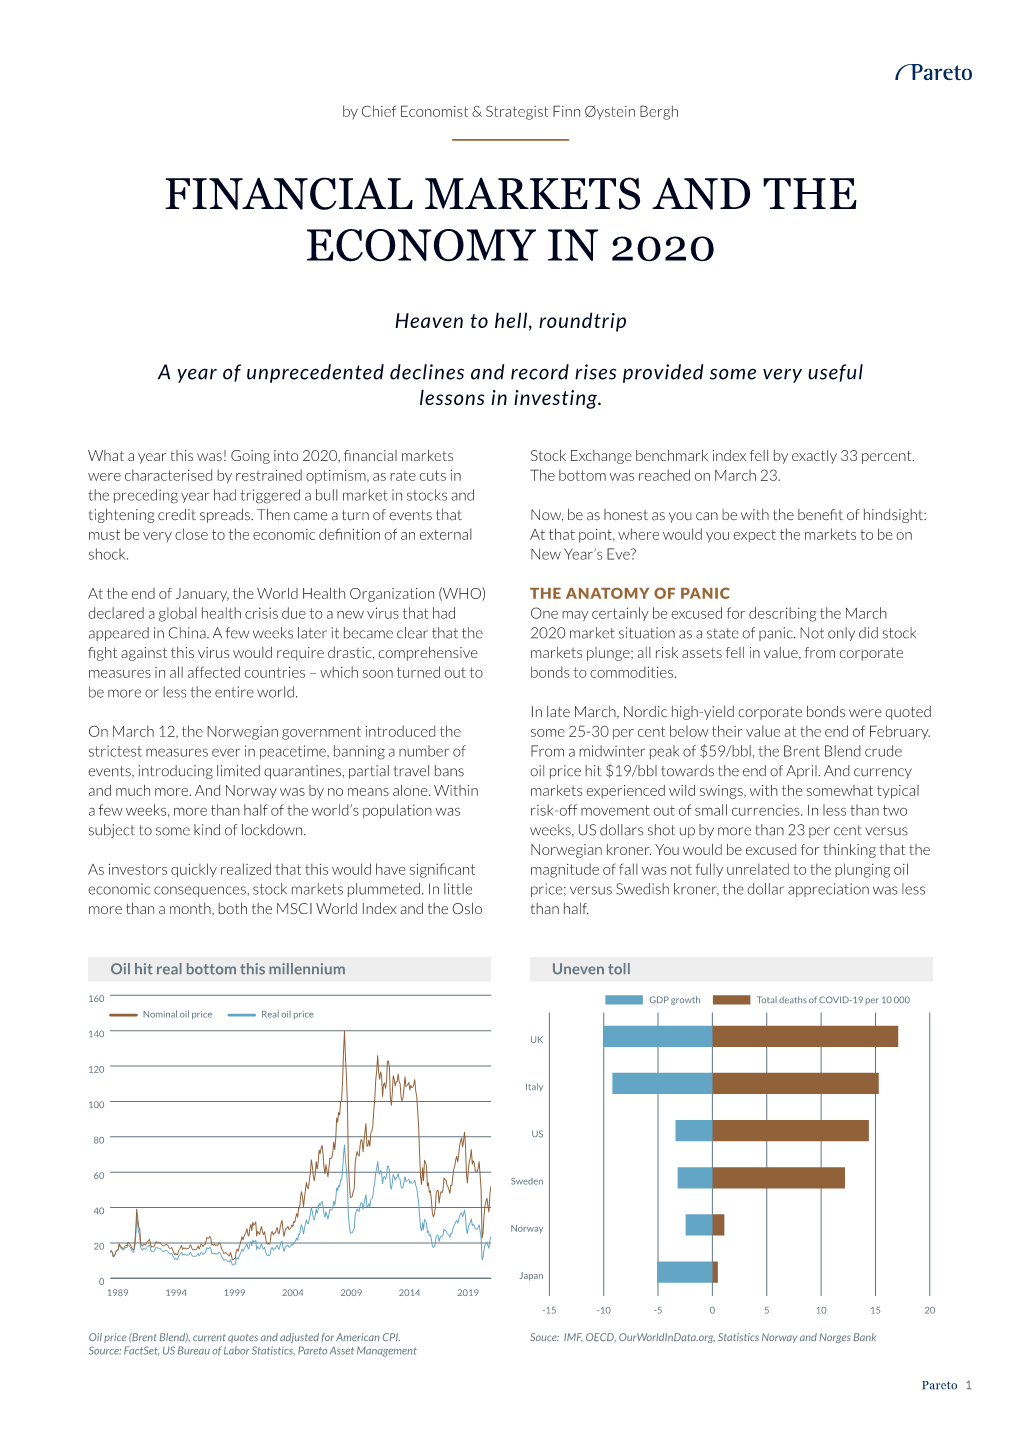 Financial Markets and the Economy in 2020